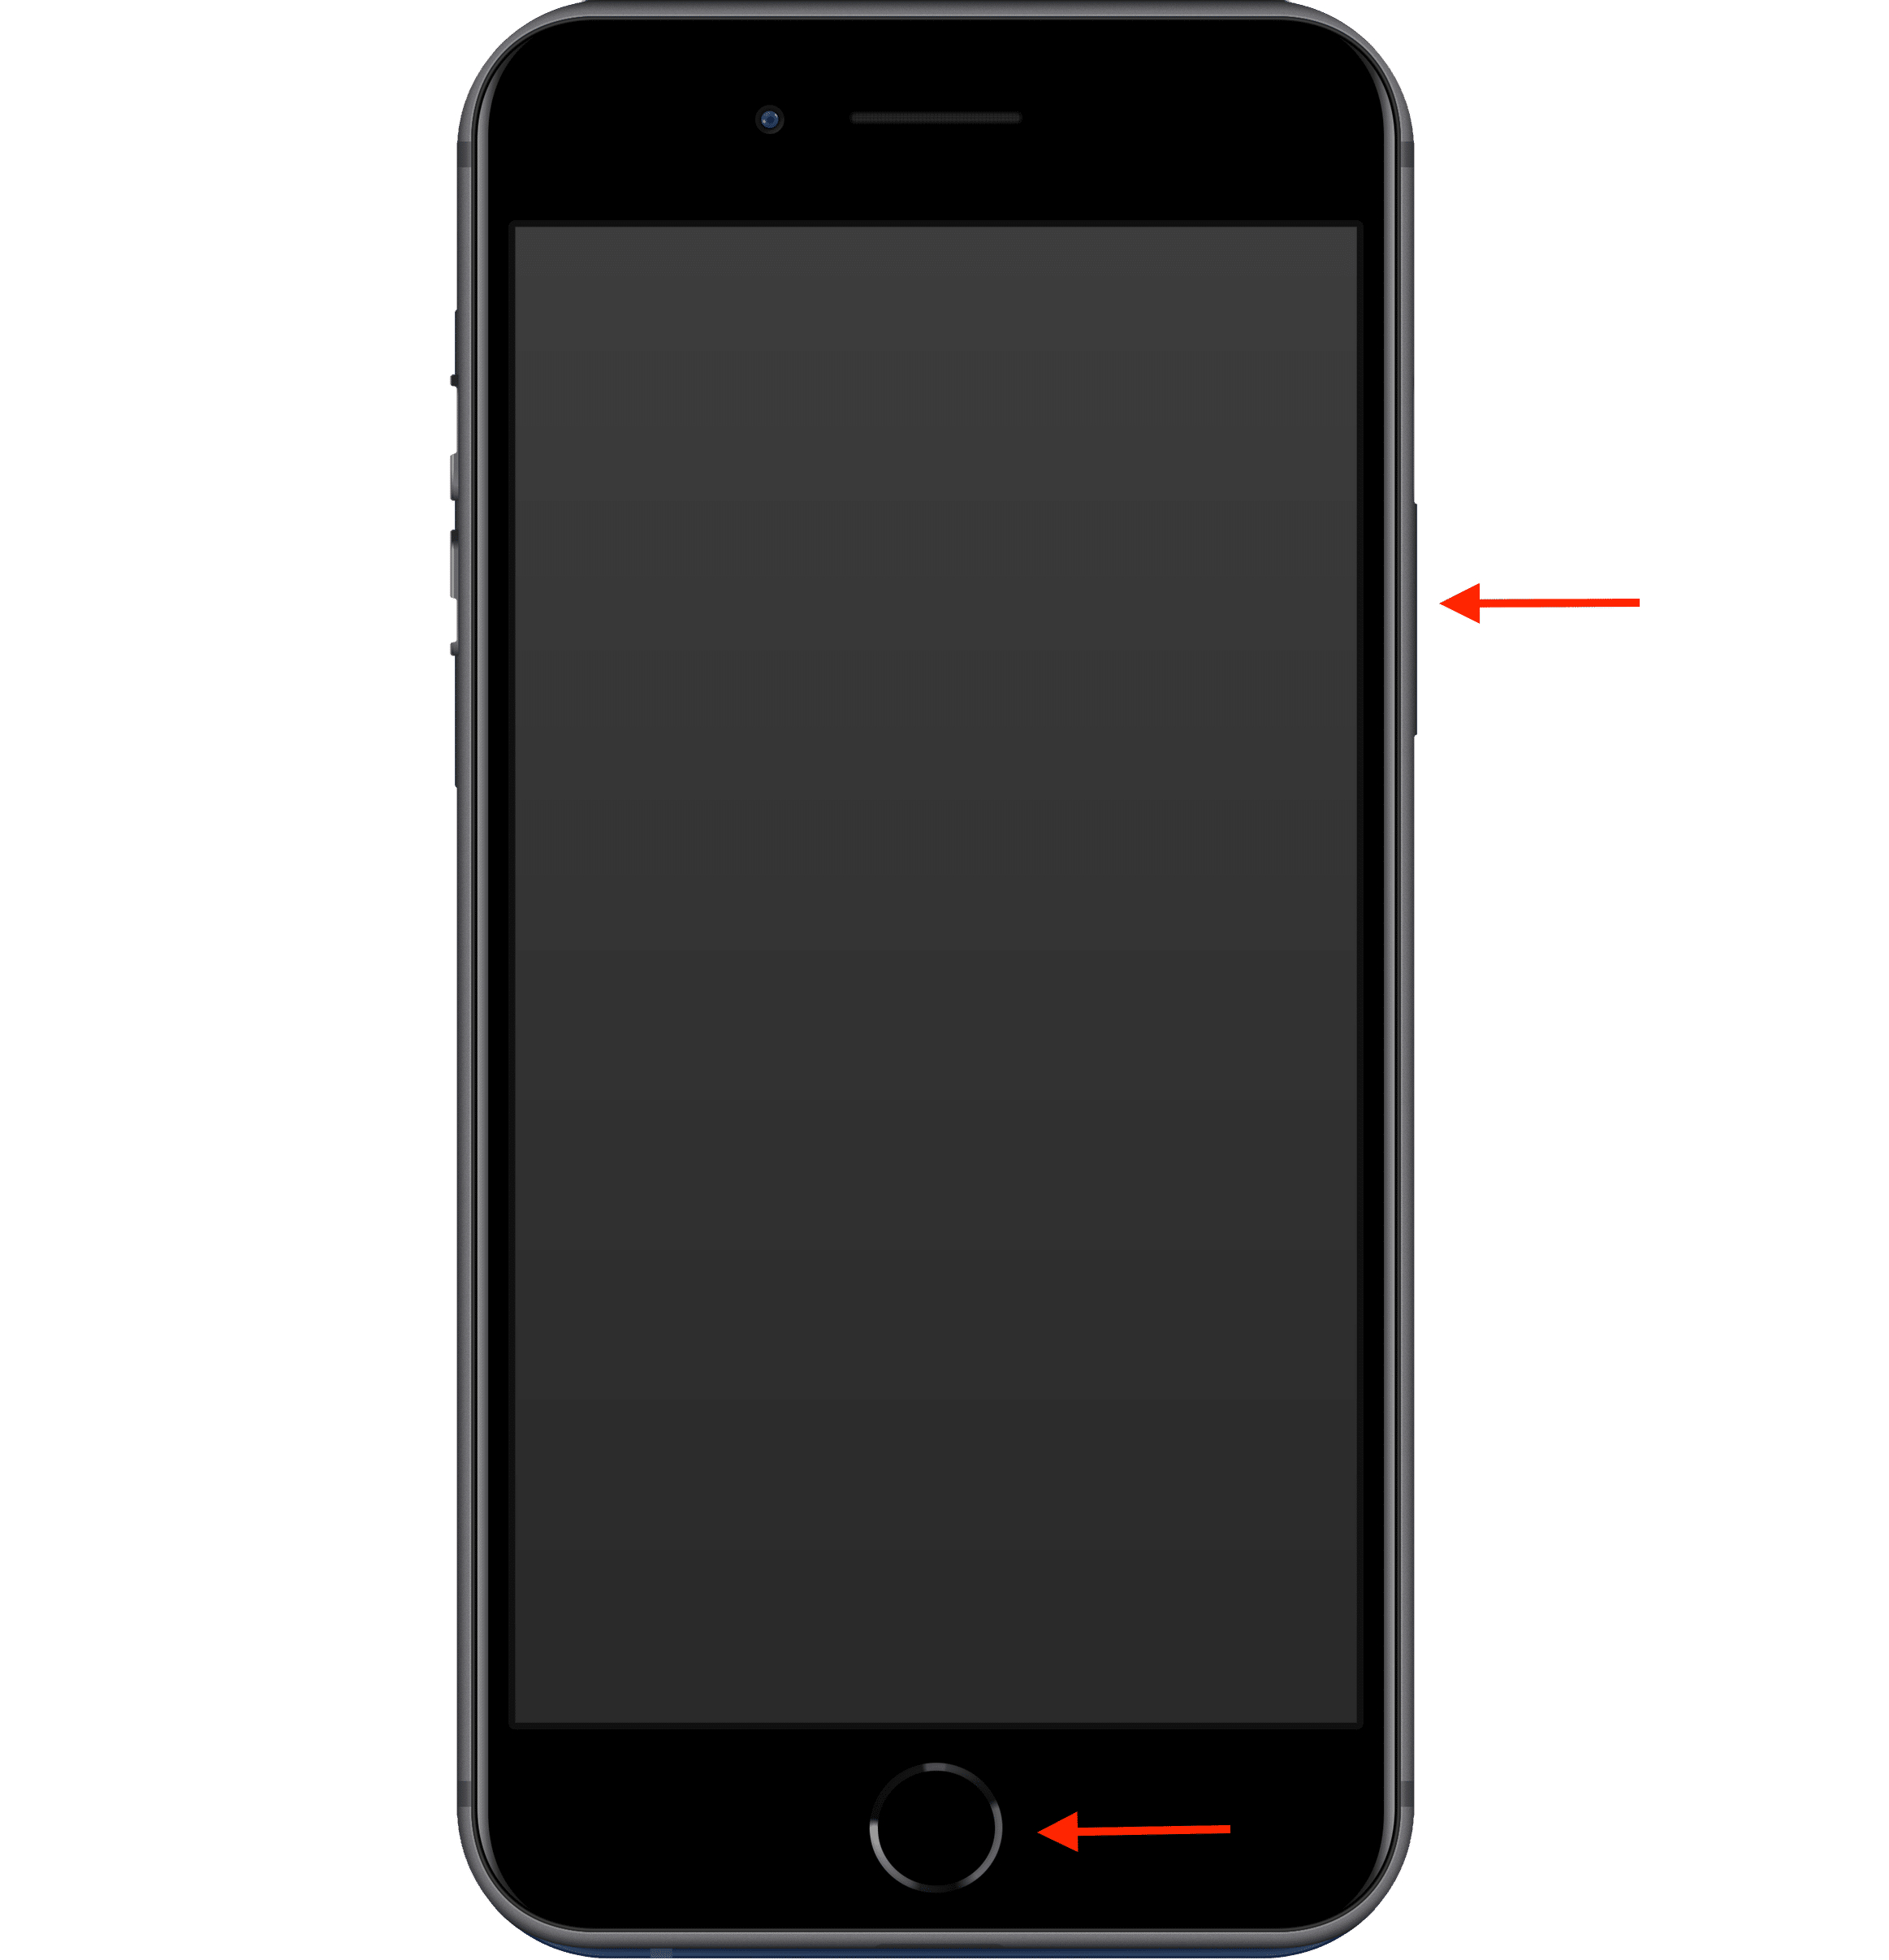 iPhone with Home button showing the buttons to take a screenshot